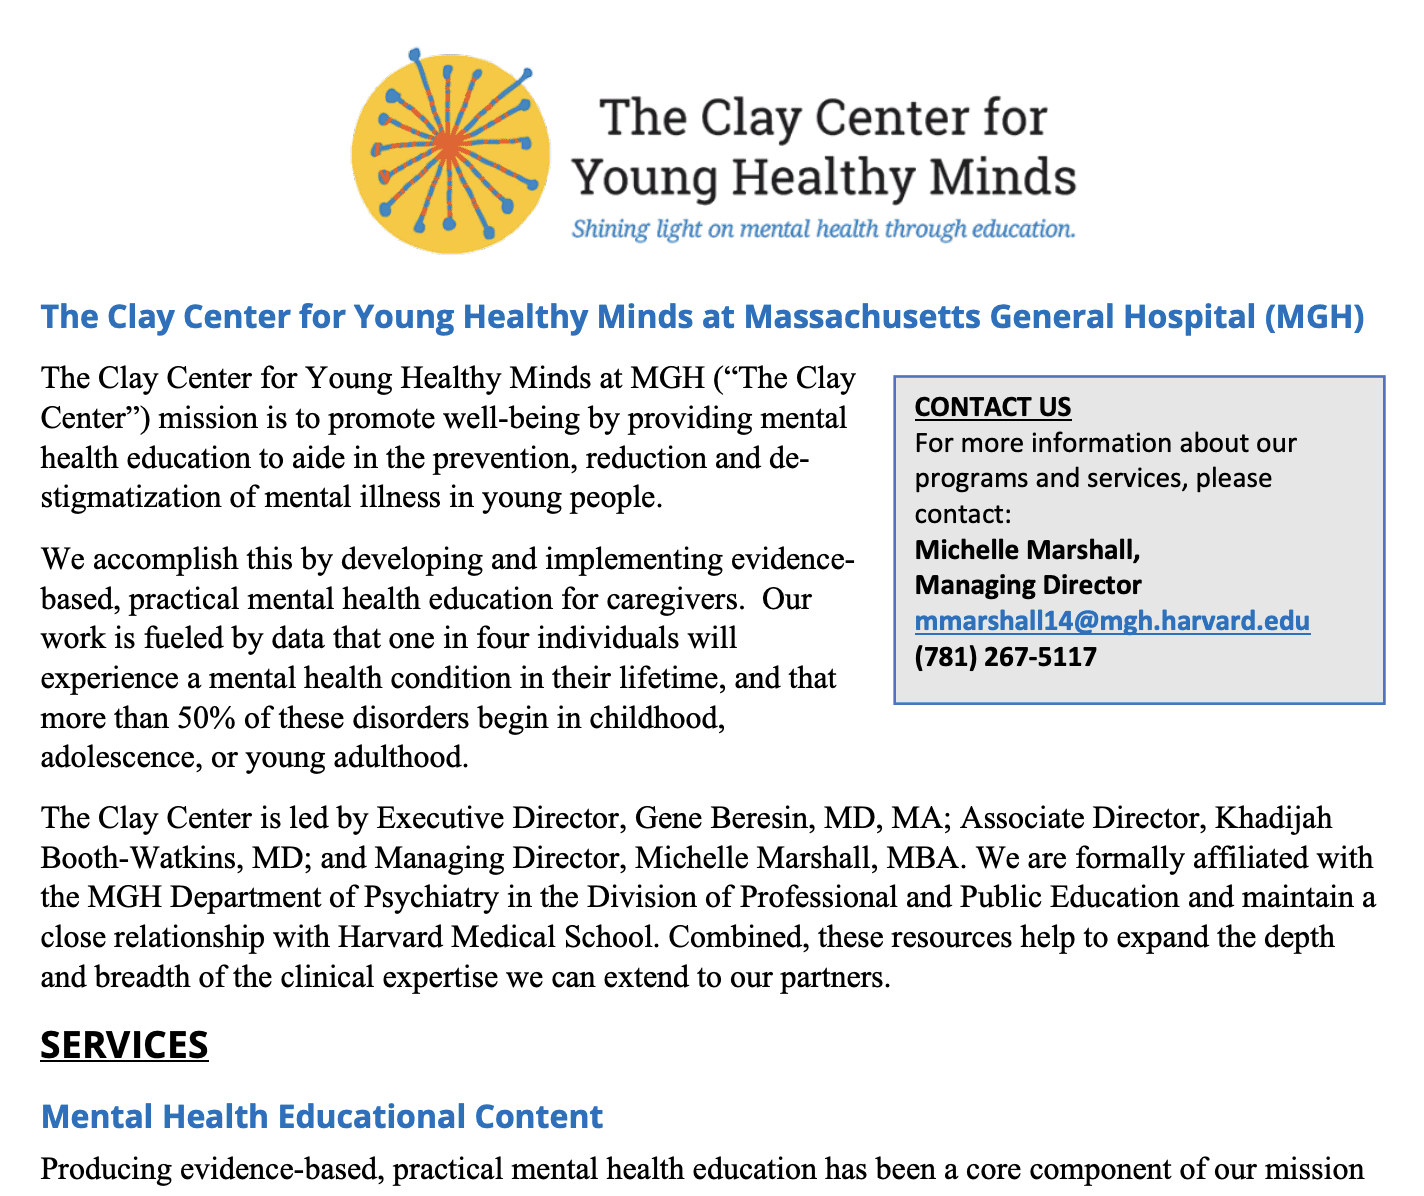 The Clay Center's Educational Services PDF - screen grab